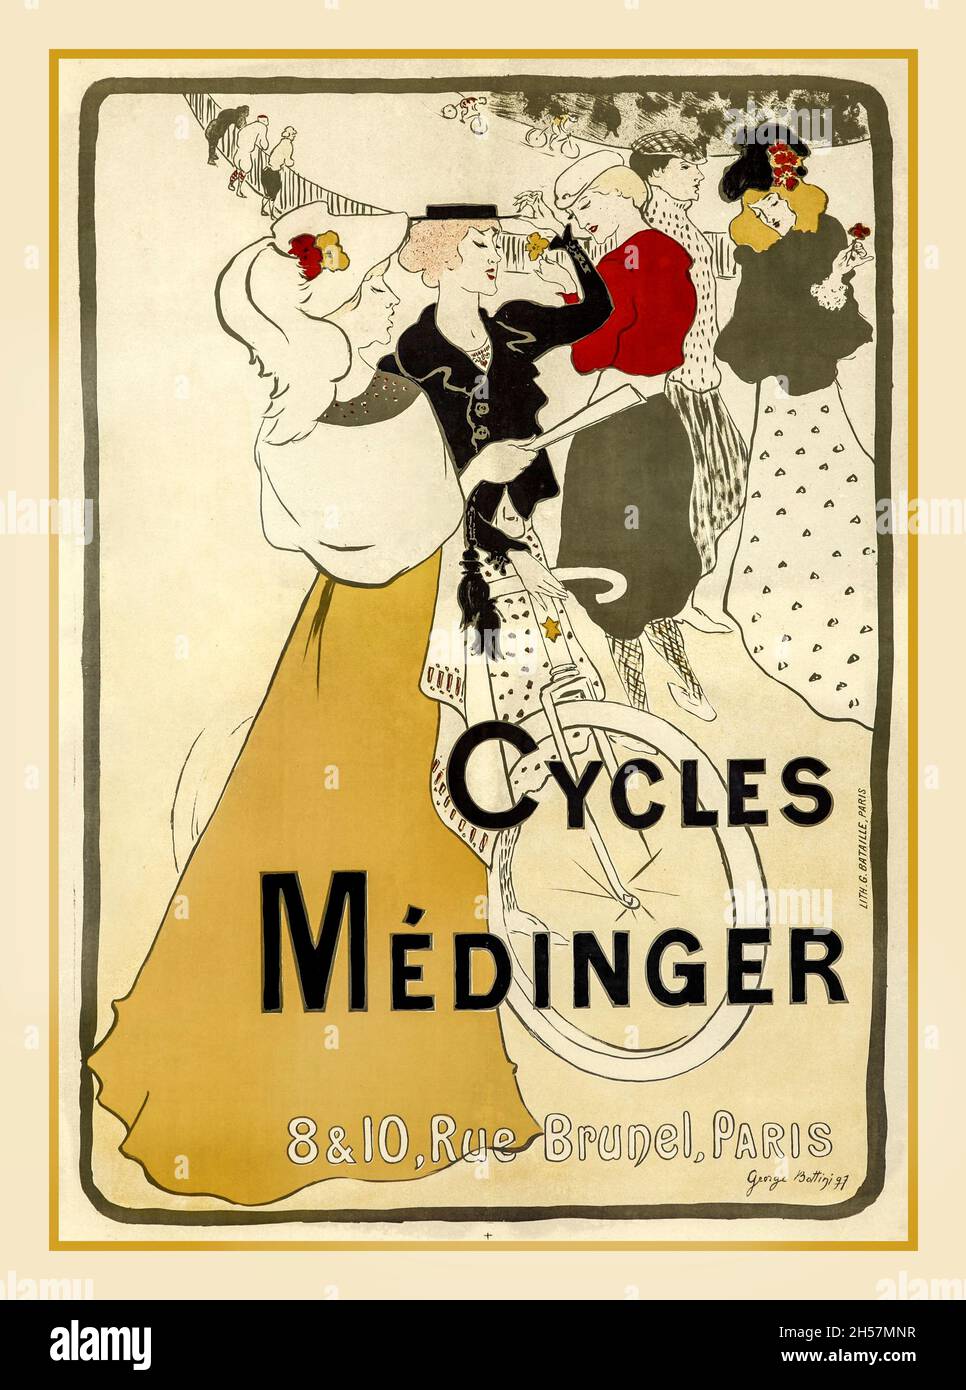 CYCLES MEDINGER PARIS 1890s French Archive Retro Vintage Bicycle Advertising Lithograph Poster by George Alfred Bottini (1874 - 1907)  Cycles Médinger. 1897. 8-10 Rue Brunel Paris France Stock Photo